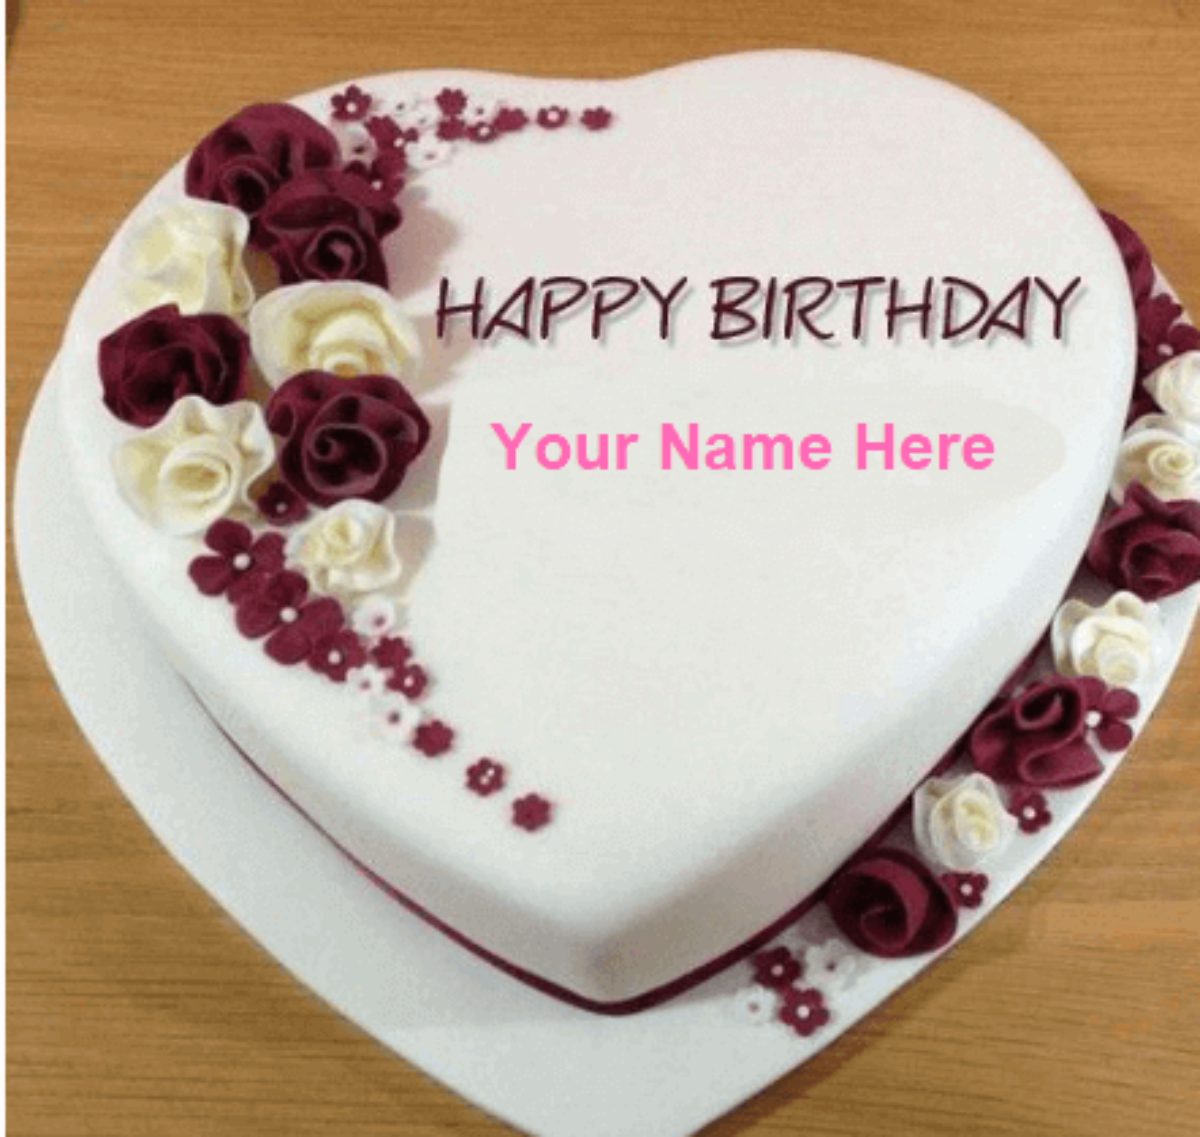 Happy Birthday Cakes Of Hart Shape - Cake with Name